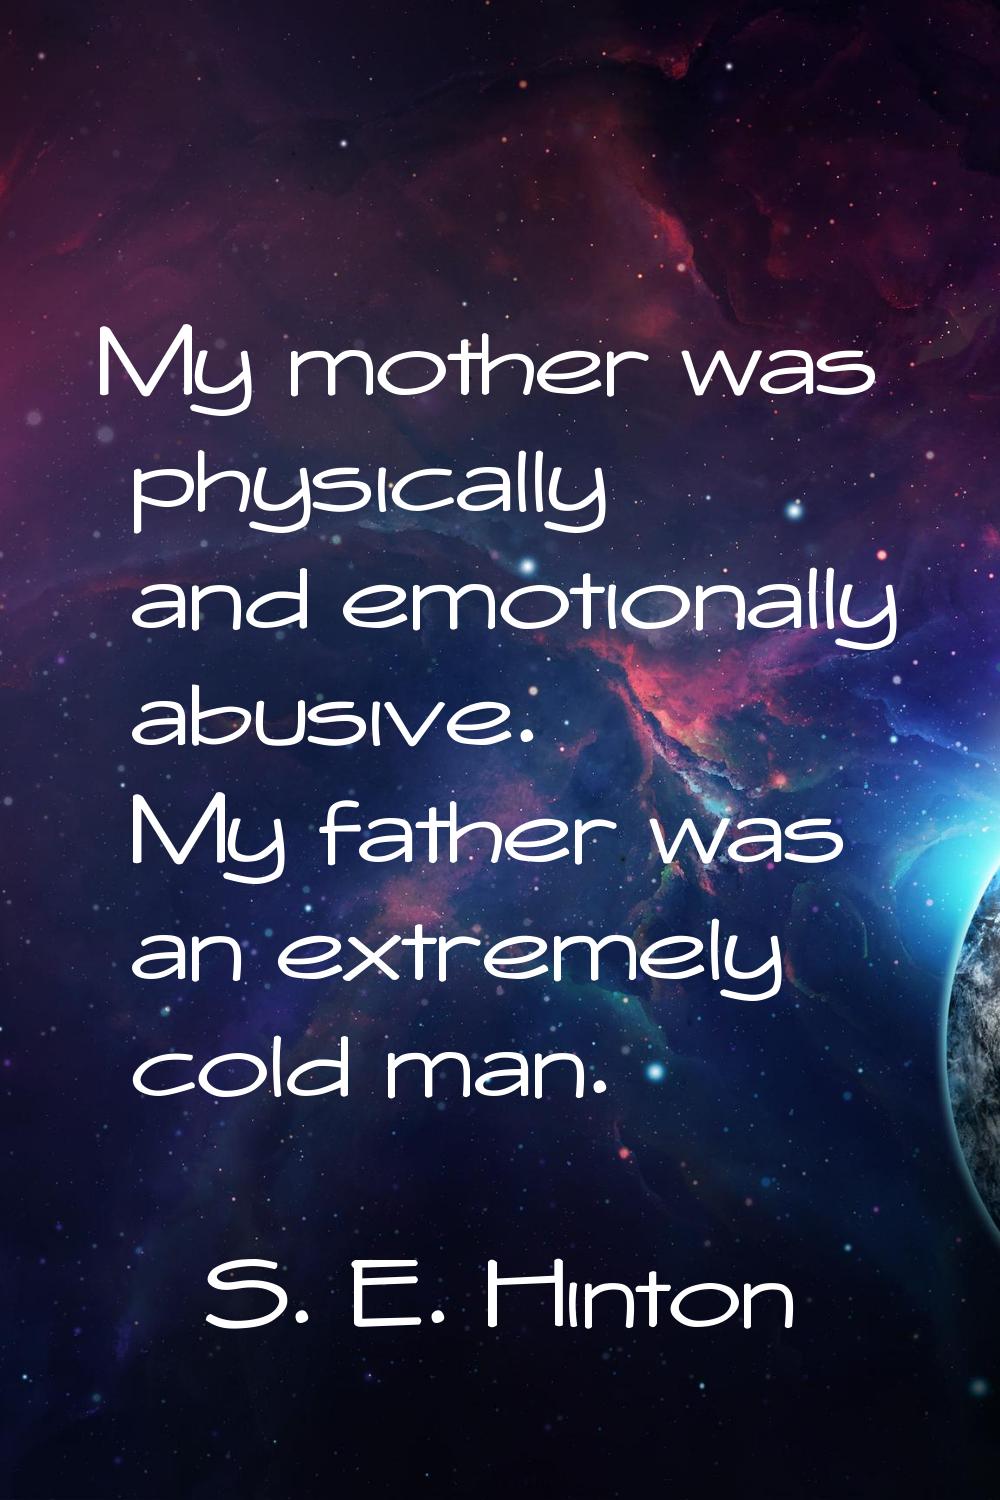 My mother was physically and emotionally abusive. My father was an extremely cold man.